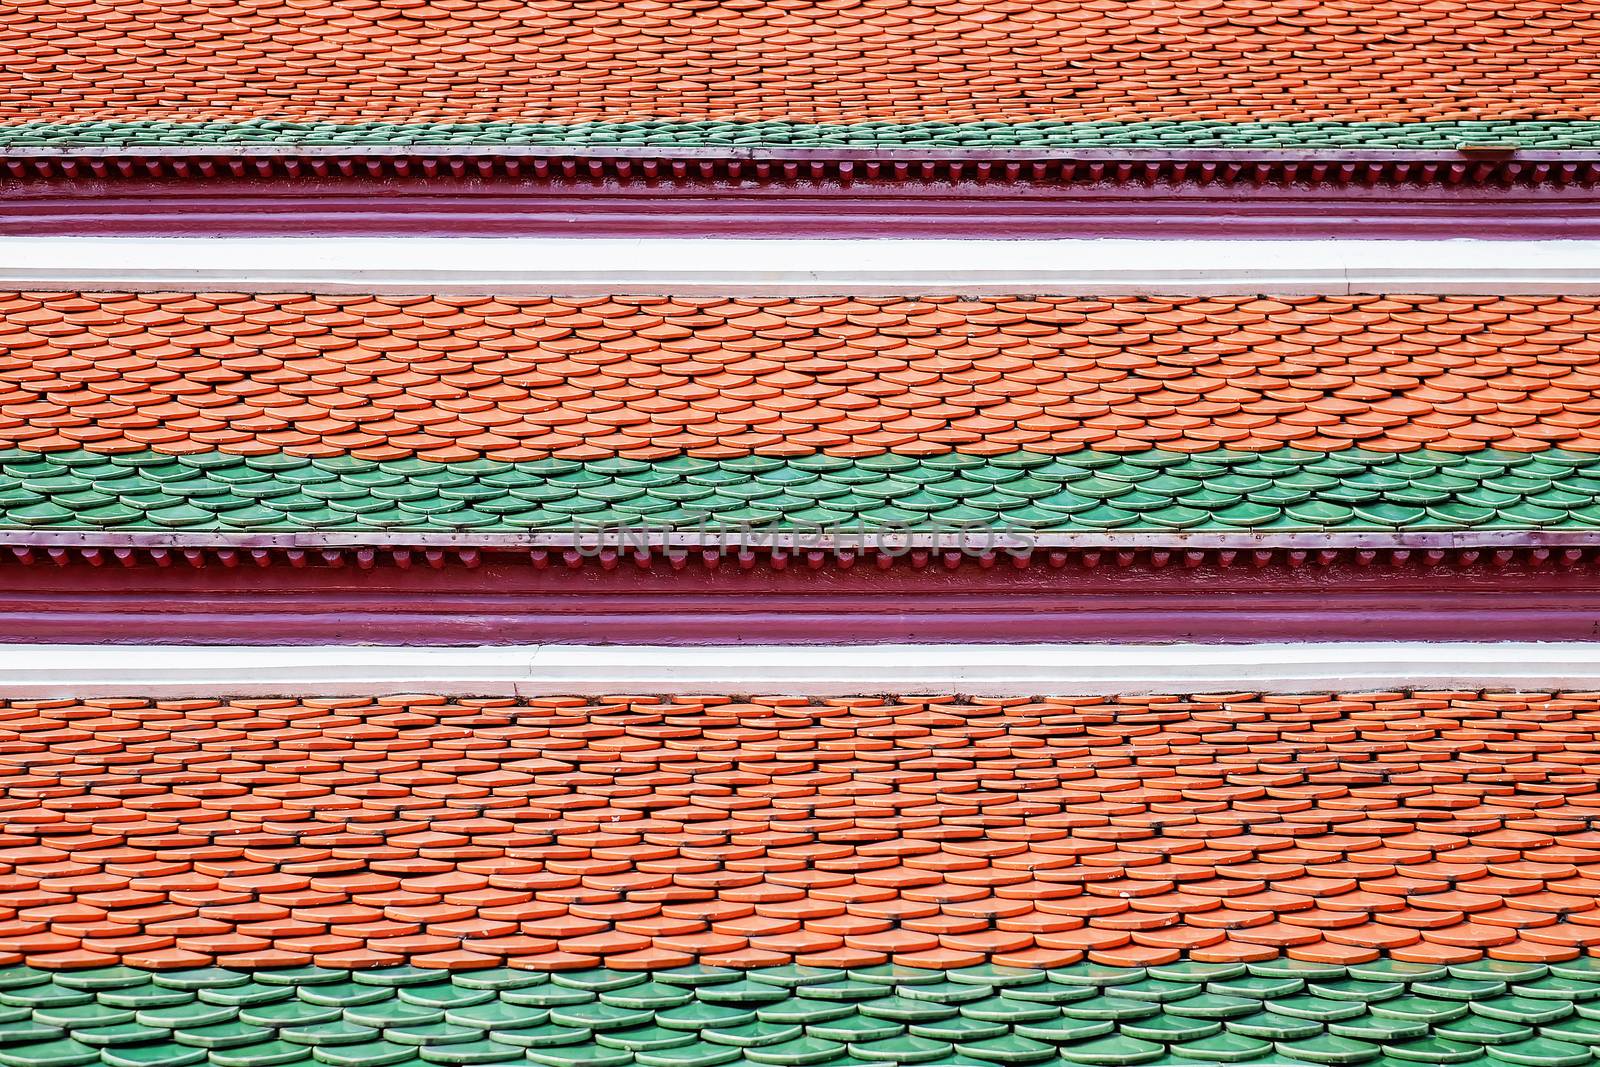 Rooftile pattern yellow green and red by Surasak